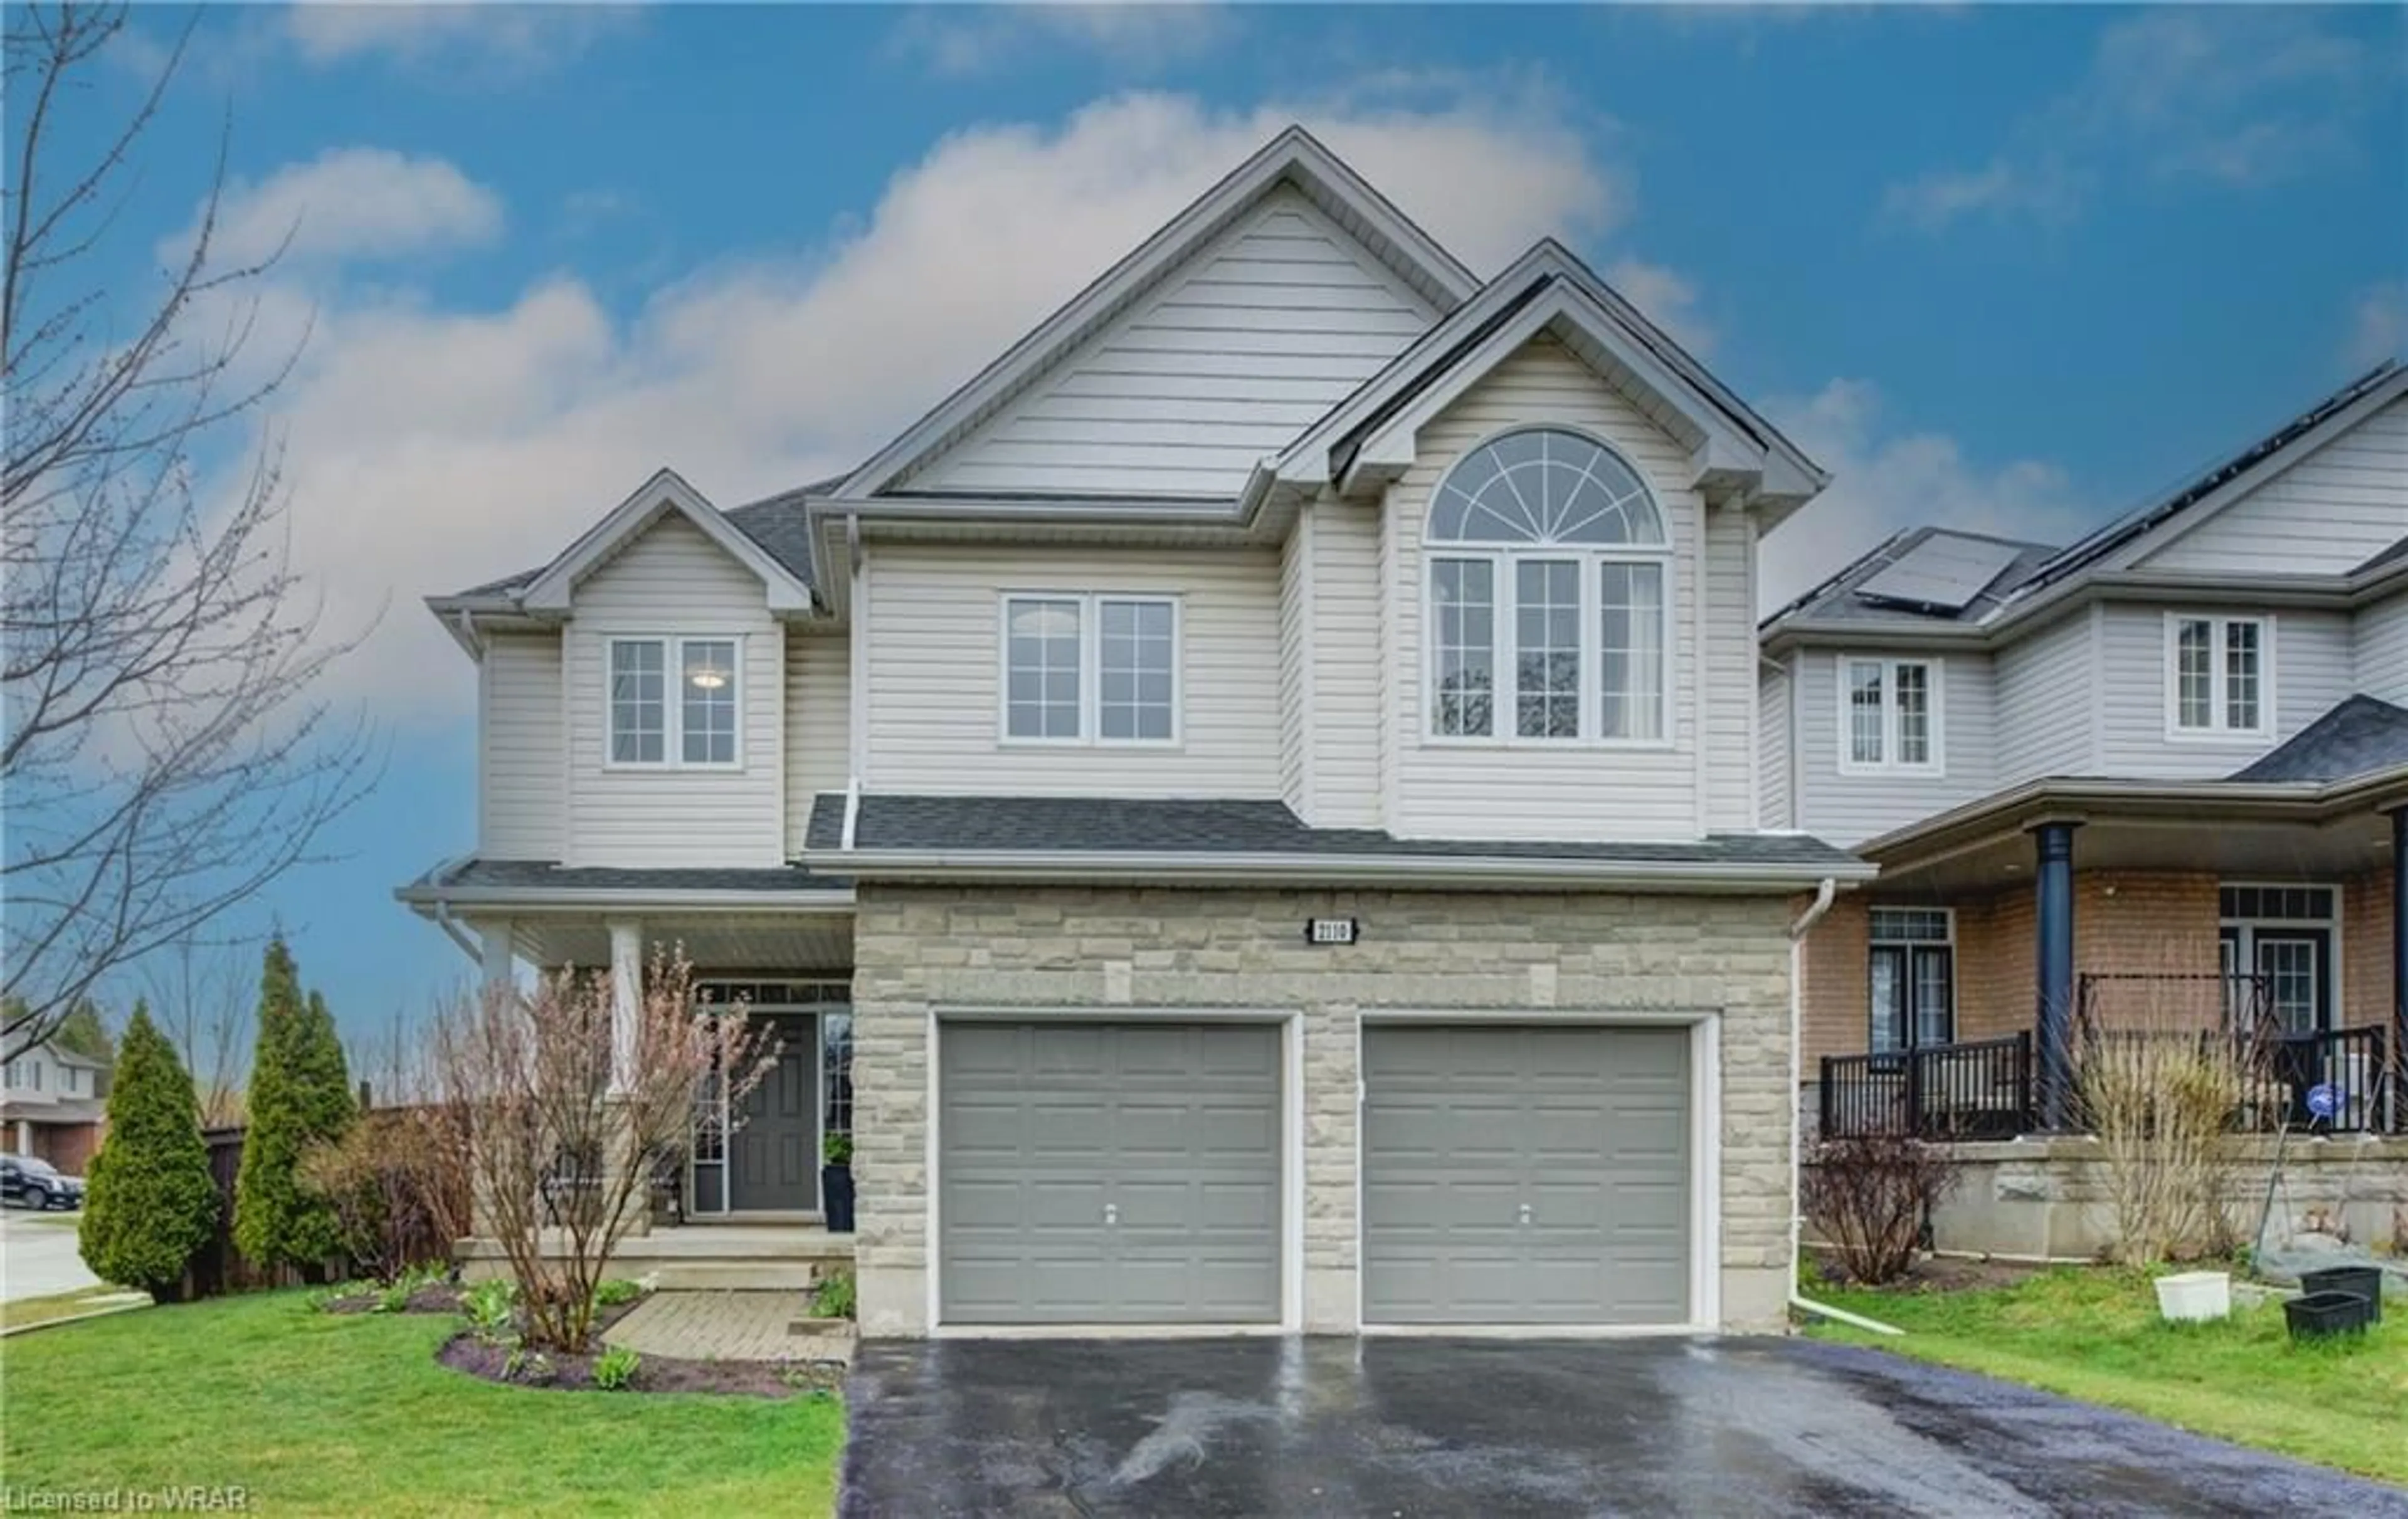 Frontside or backside of a home for 2110 Countrystone Pl, Kitchener Ontario N2N 3L7